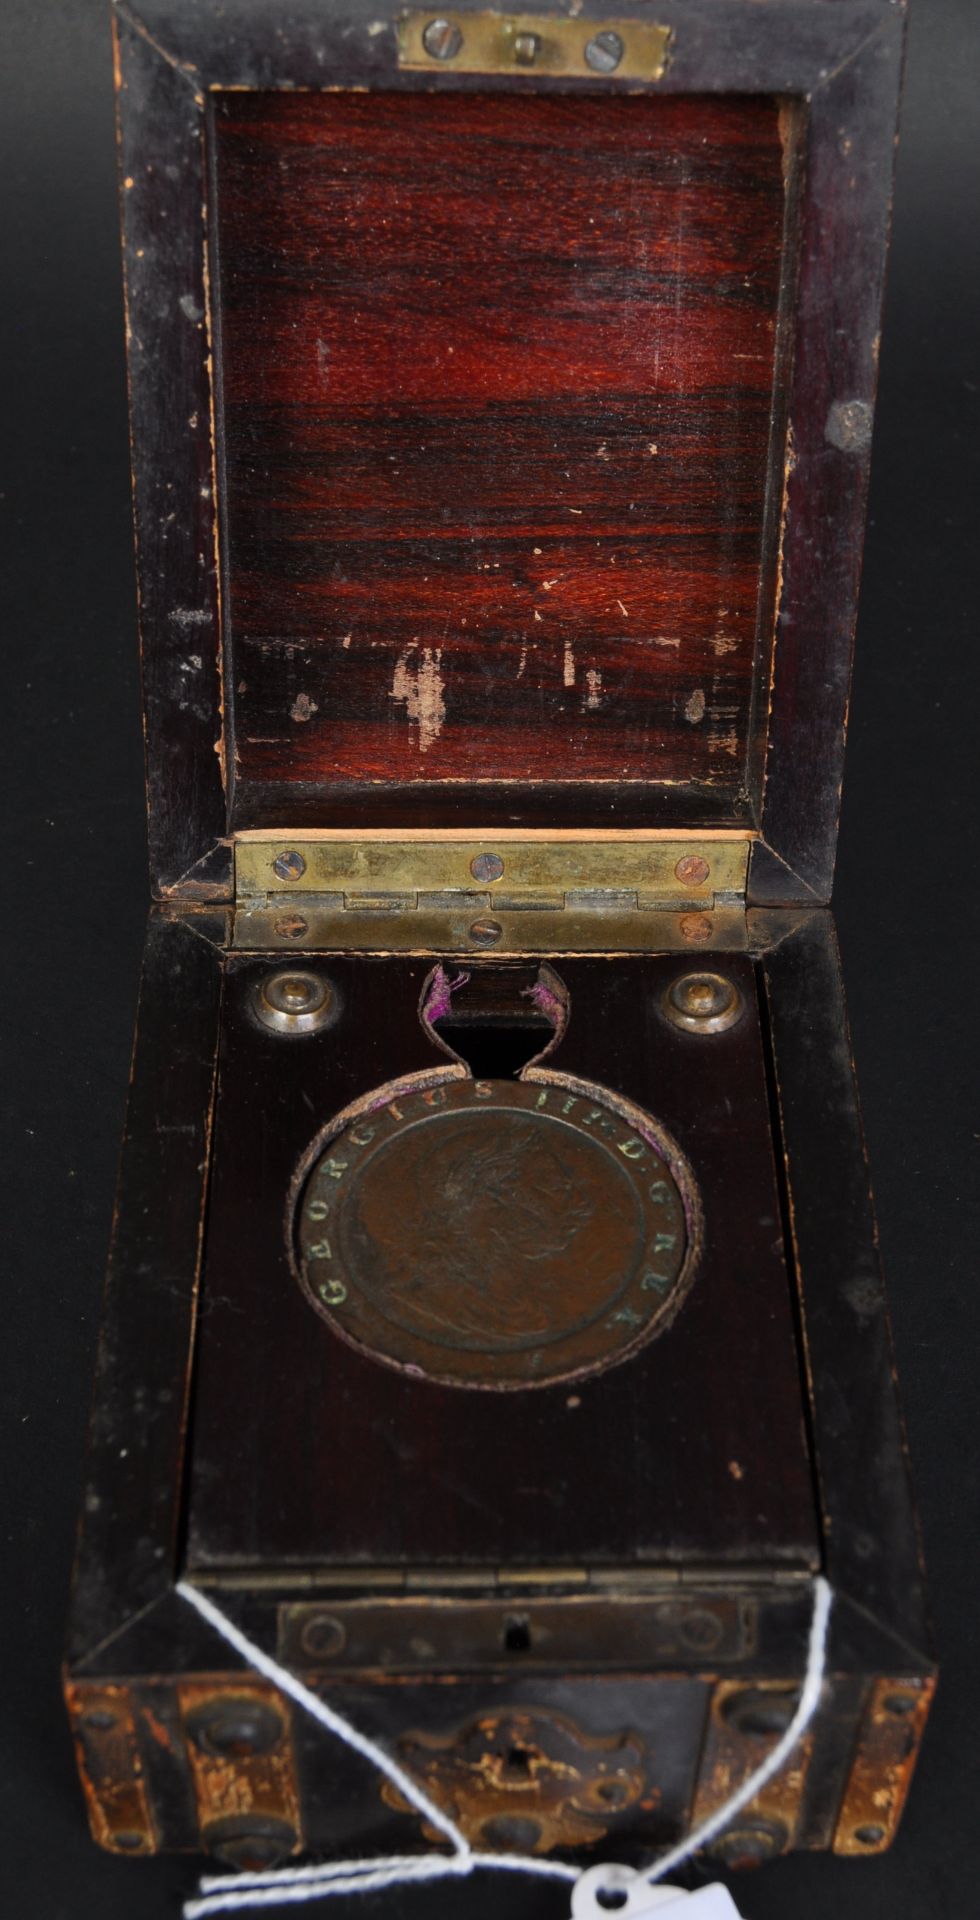 1797 KING GEORGE III COPPER BRITANNIA COIN IN WOODEN CASE - Image 3 of 5